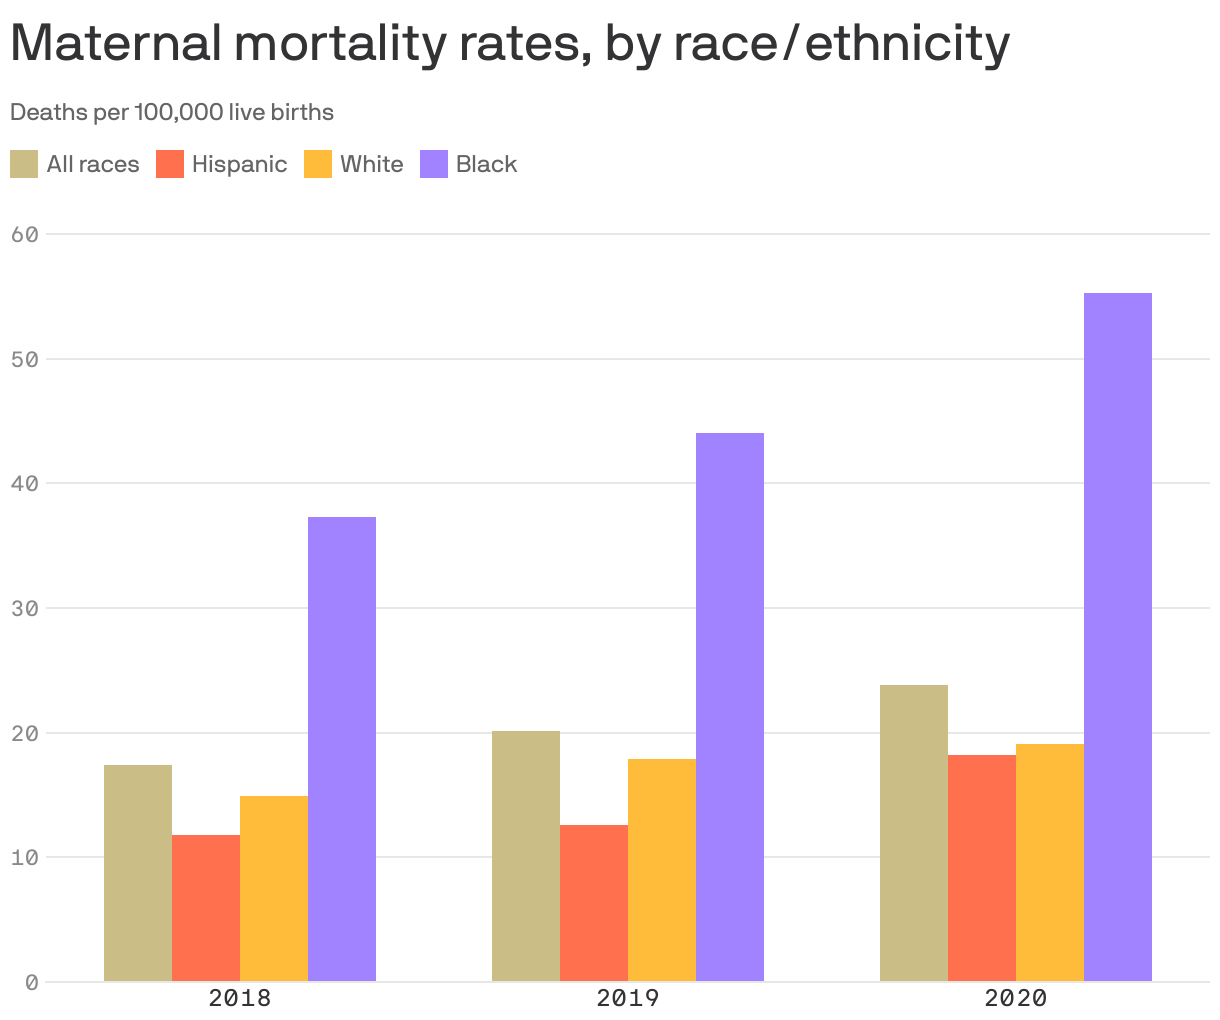 Maternal mortality rates, by race/ethnicity